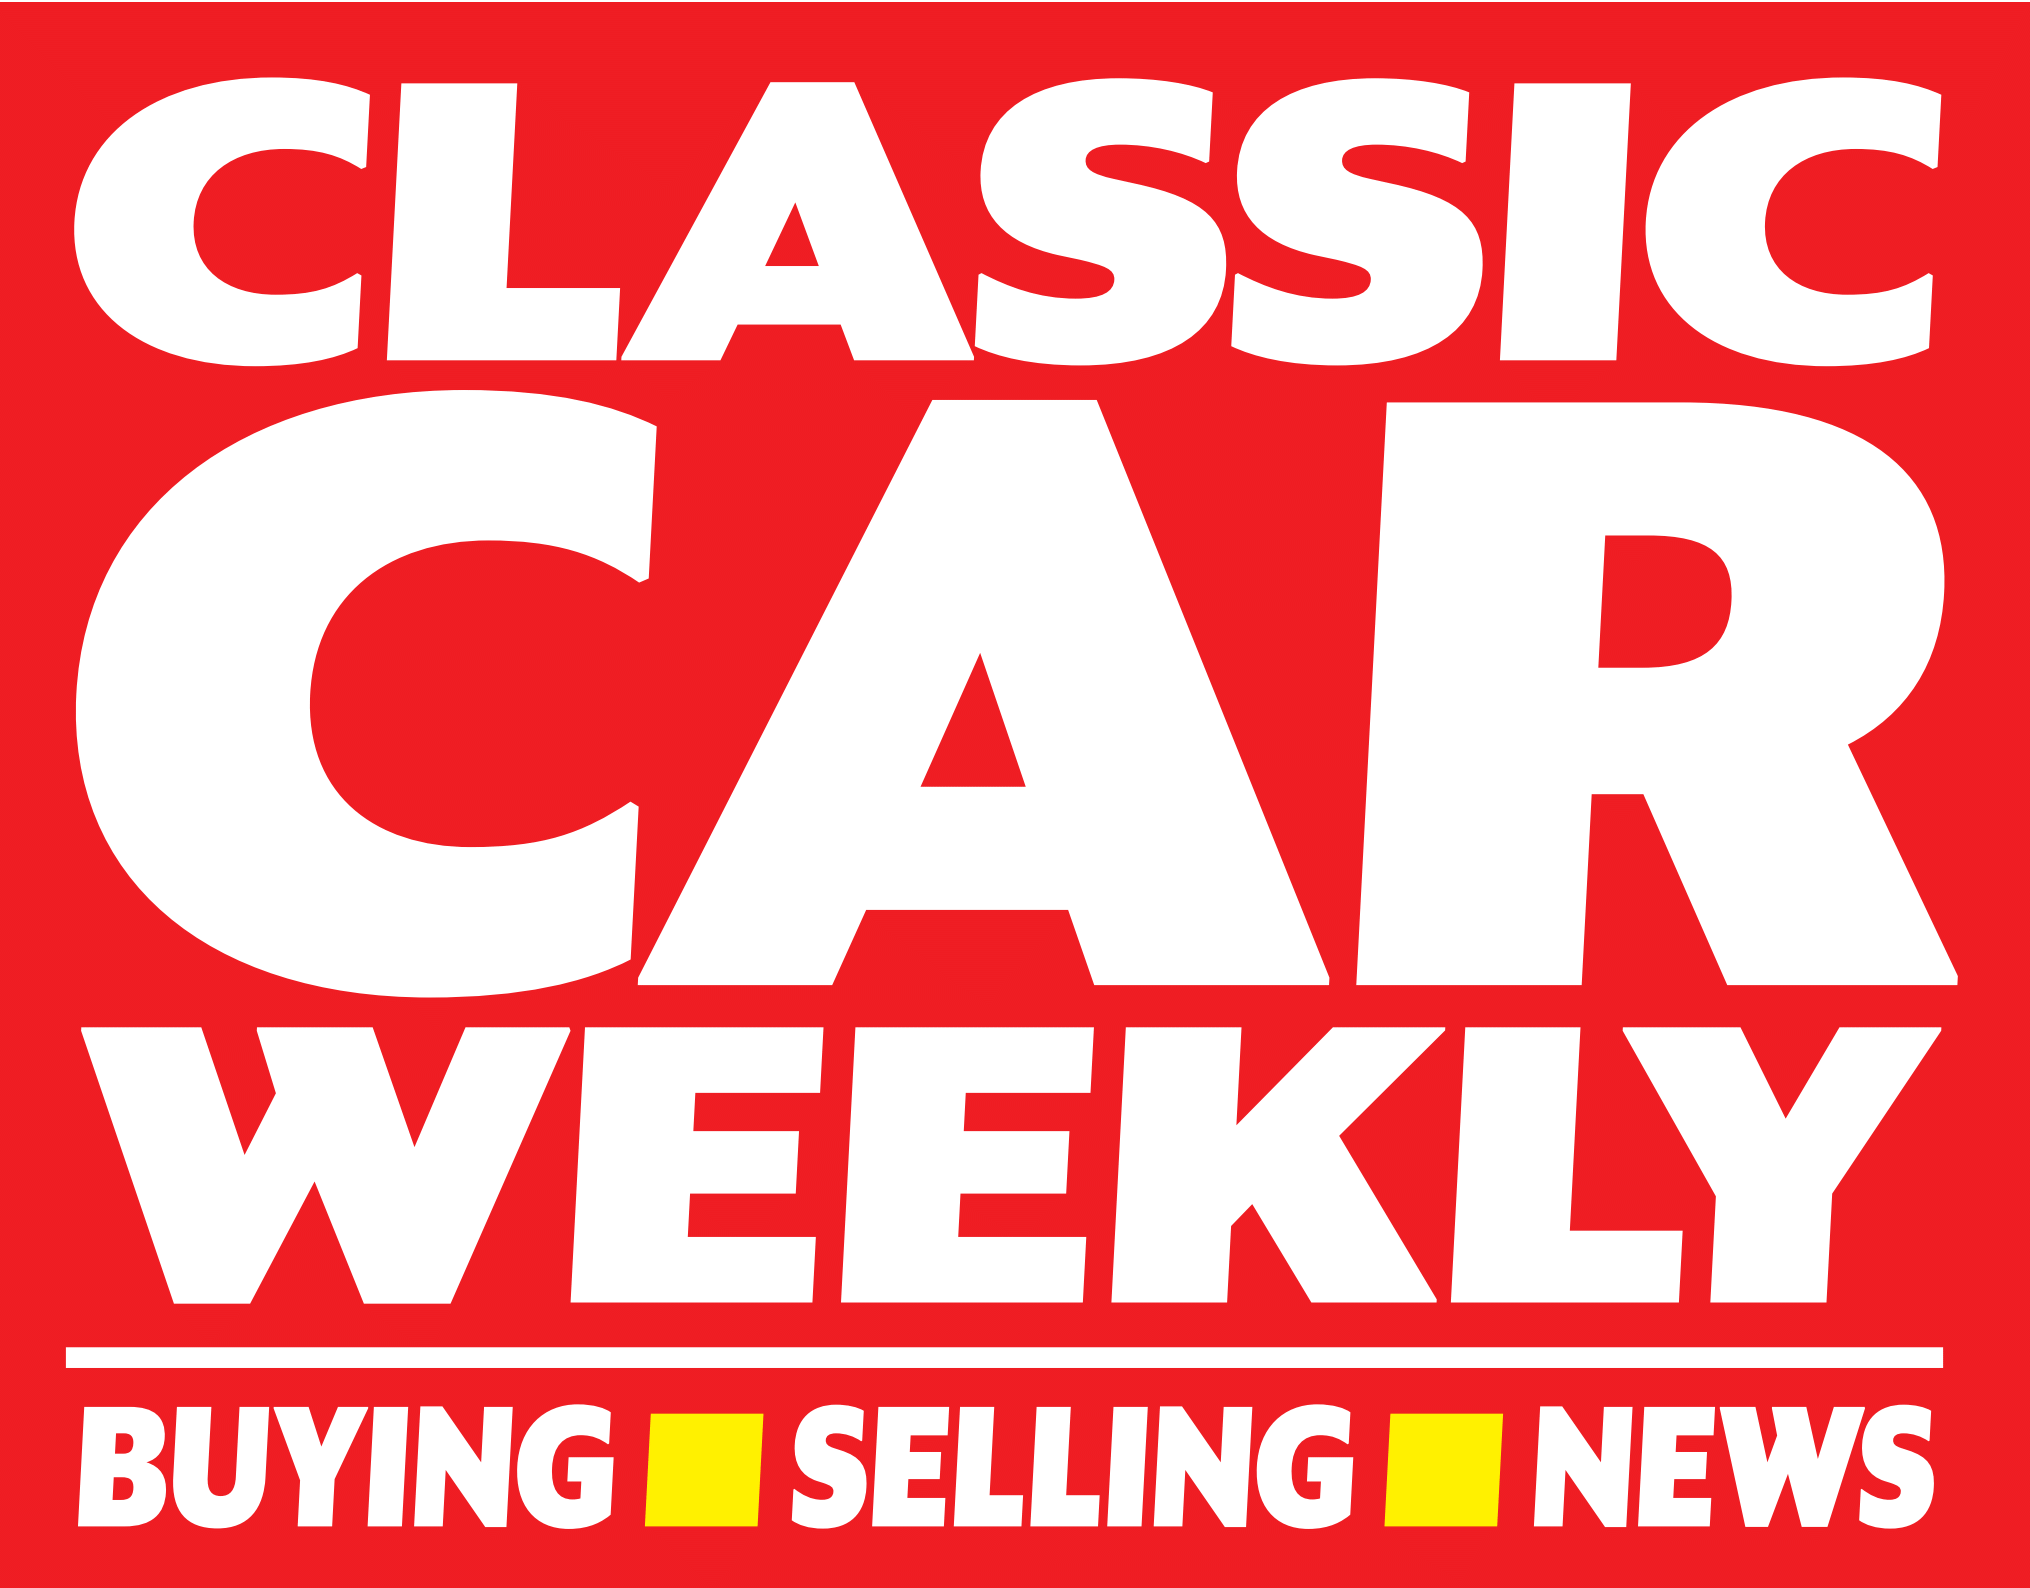 Classic Car Weekly - The Hottest Buys